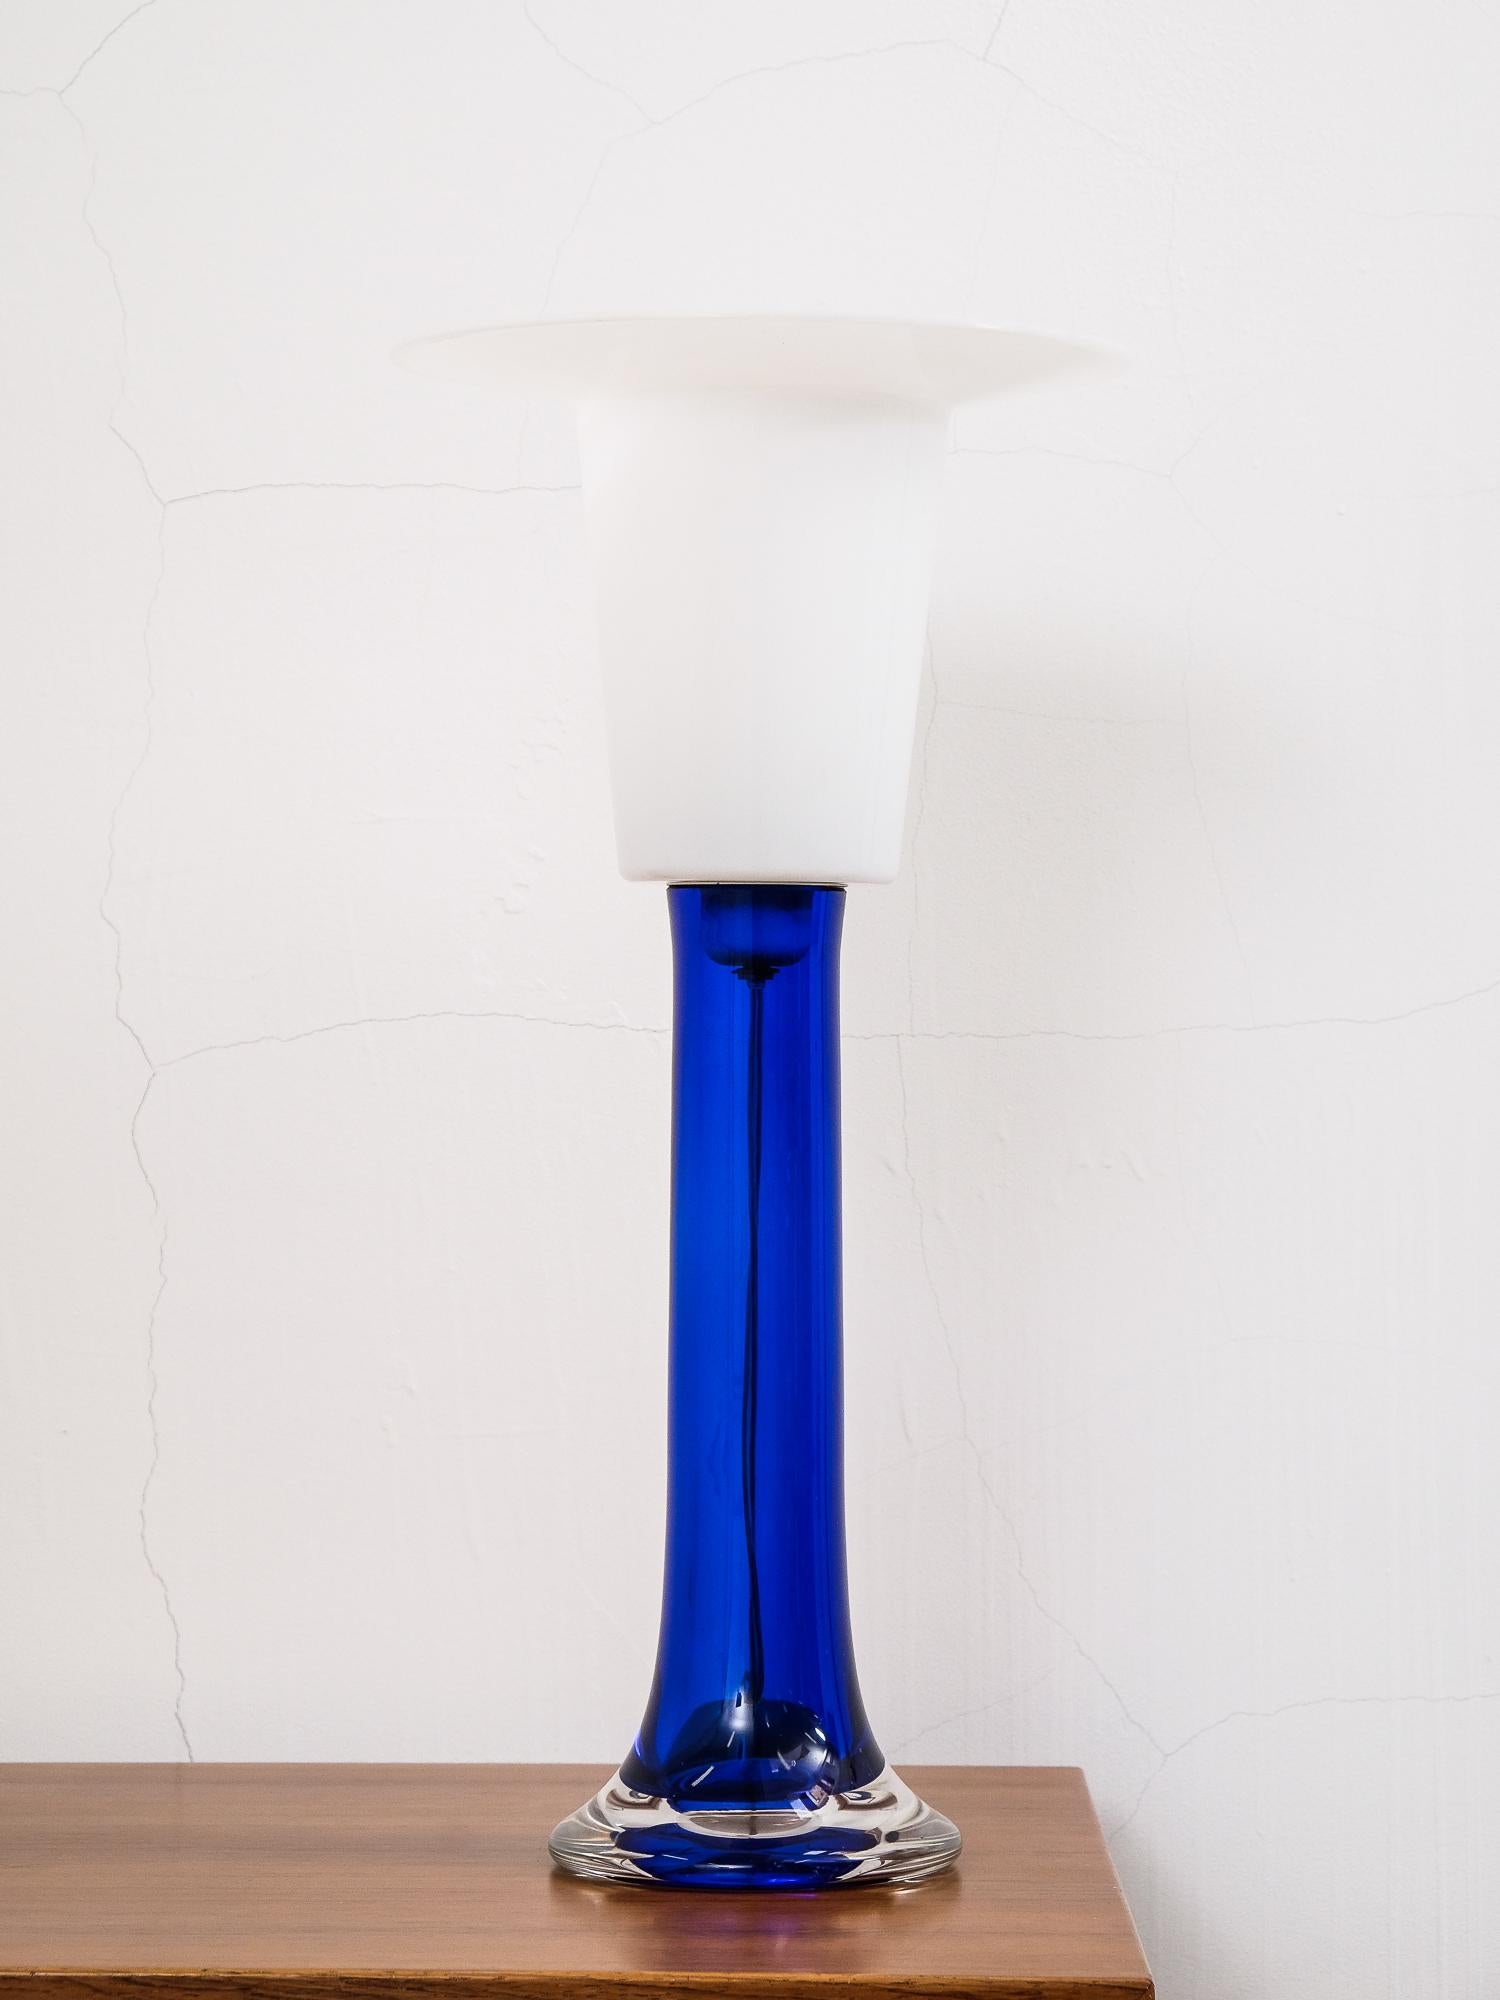 Large 1970s cobalt blue glass table lamp by Luxus Vittsjö, made in Sweden. The top is made of white plastic.

E27 socket.